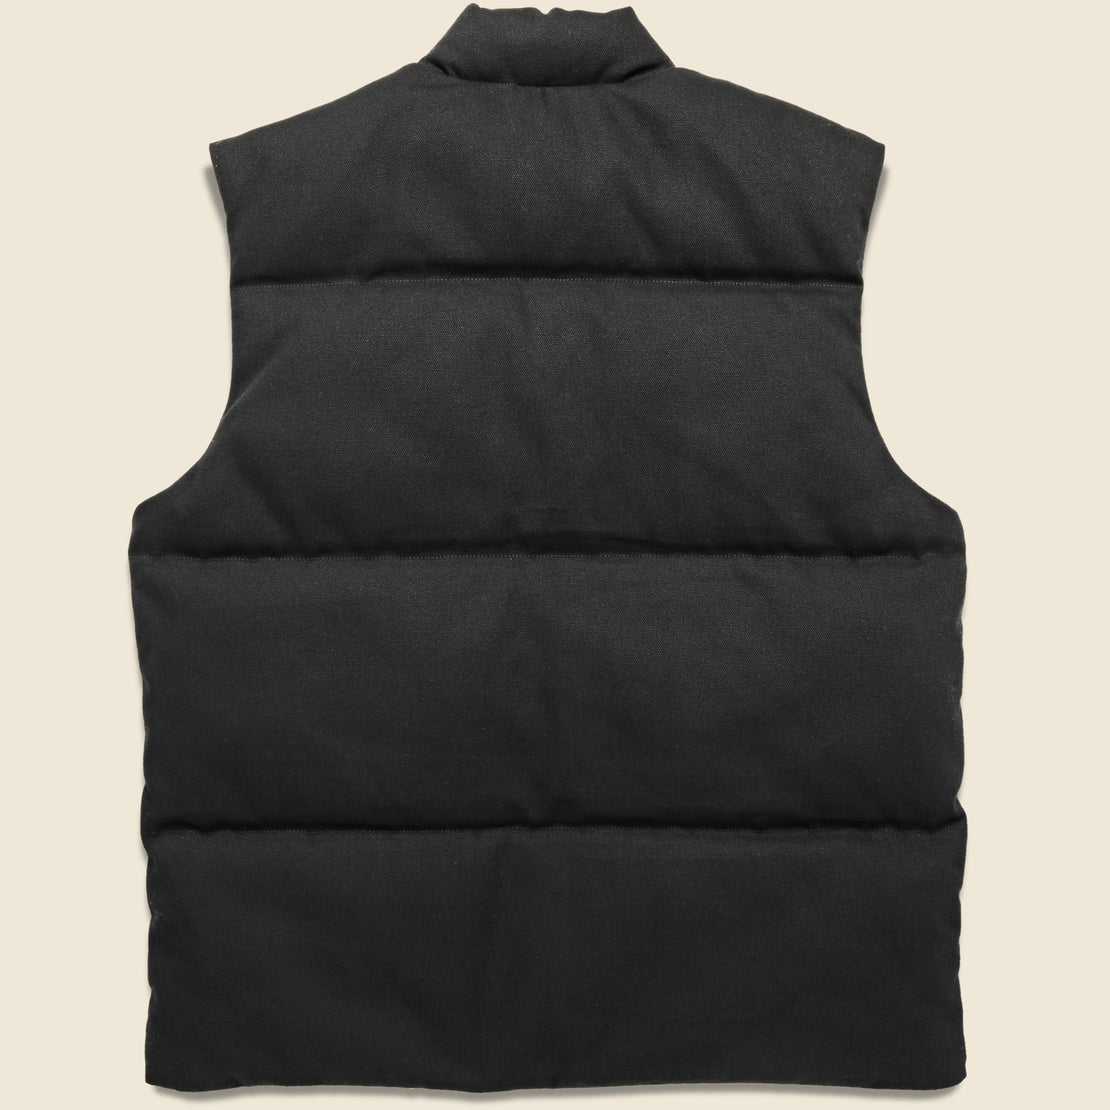 Brooke Vest - Black - Carhartt WIP - STAG Provisions - Outerwear - Vest